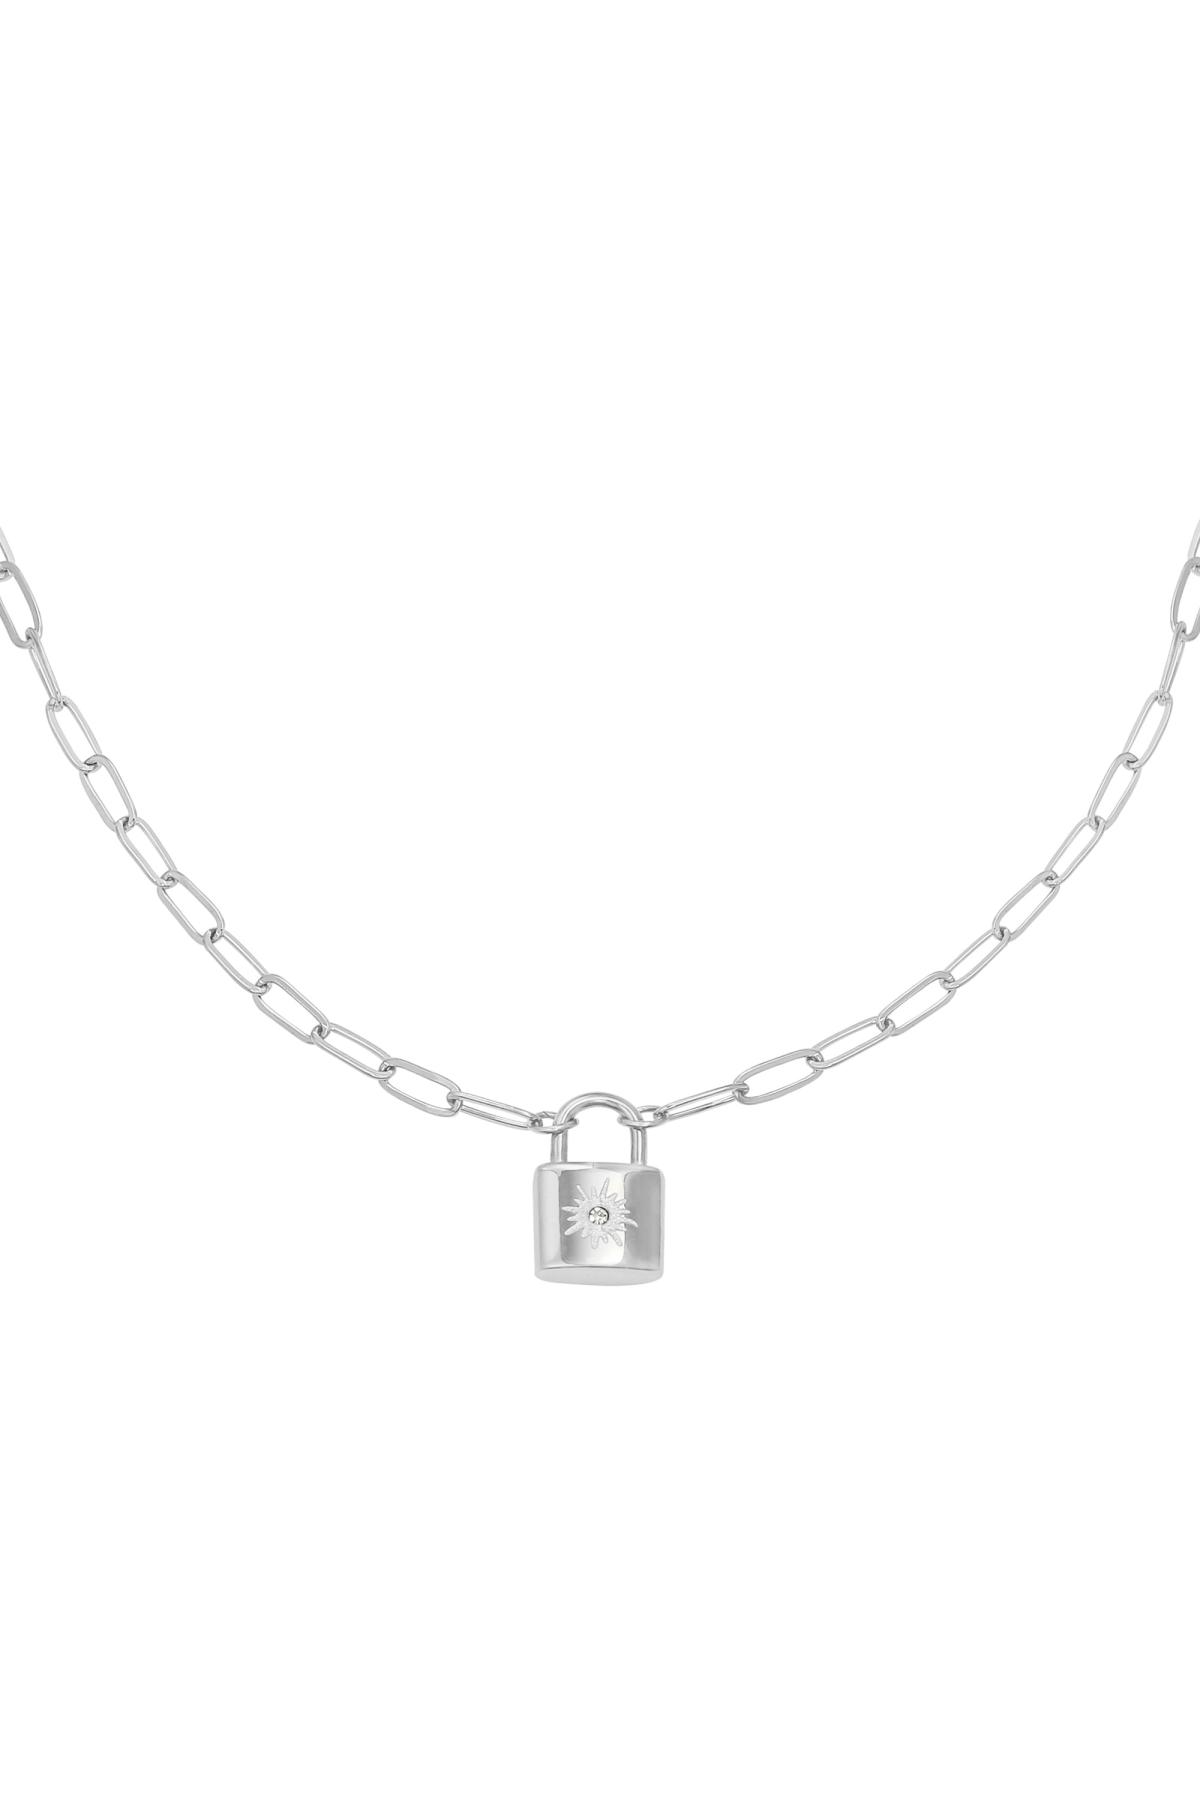 Necklace Little Lock Silver Stainless Steel